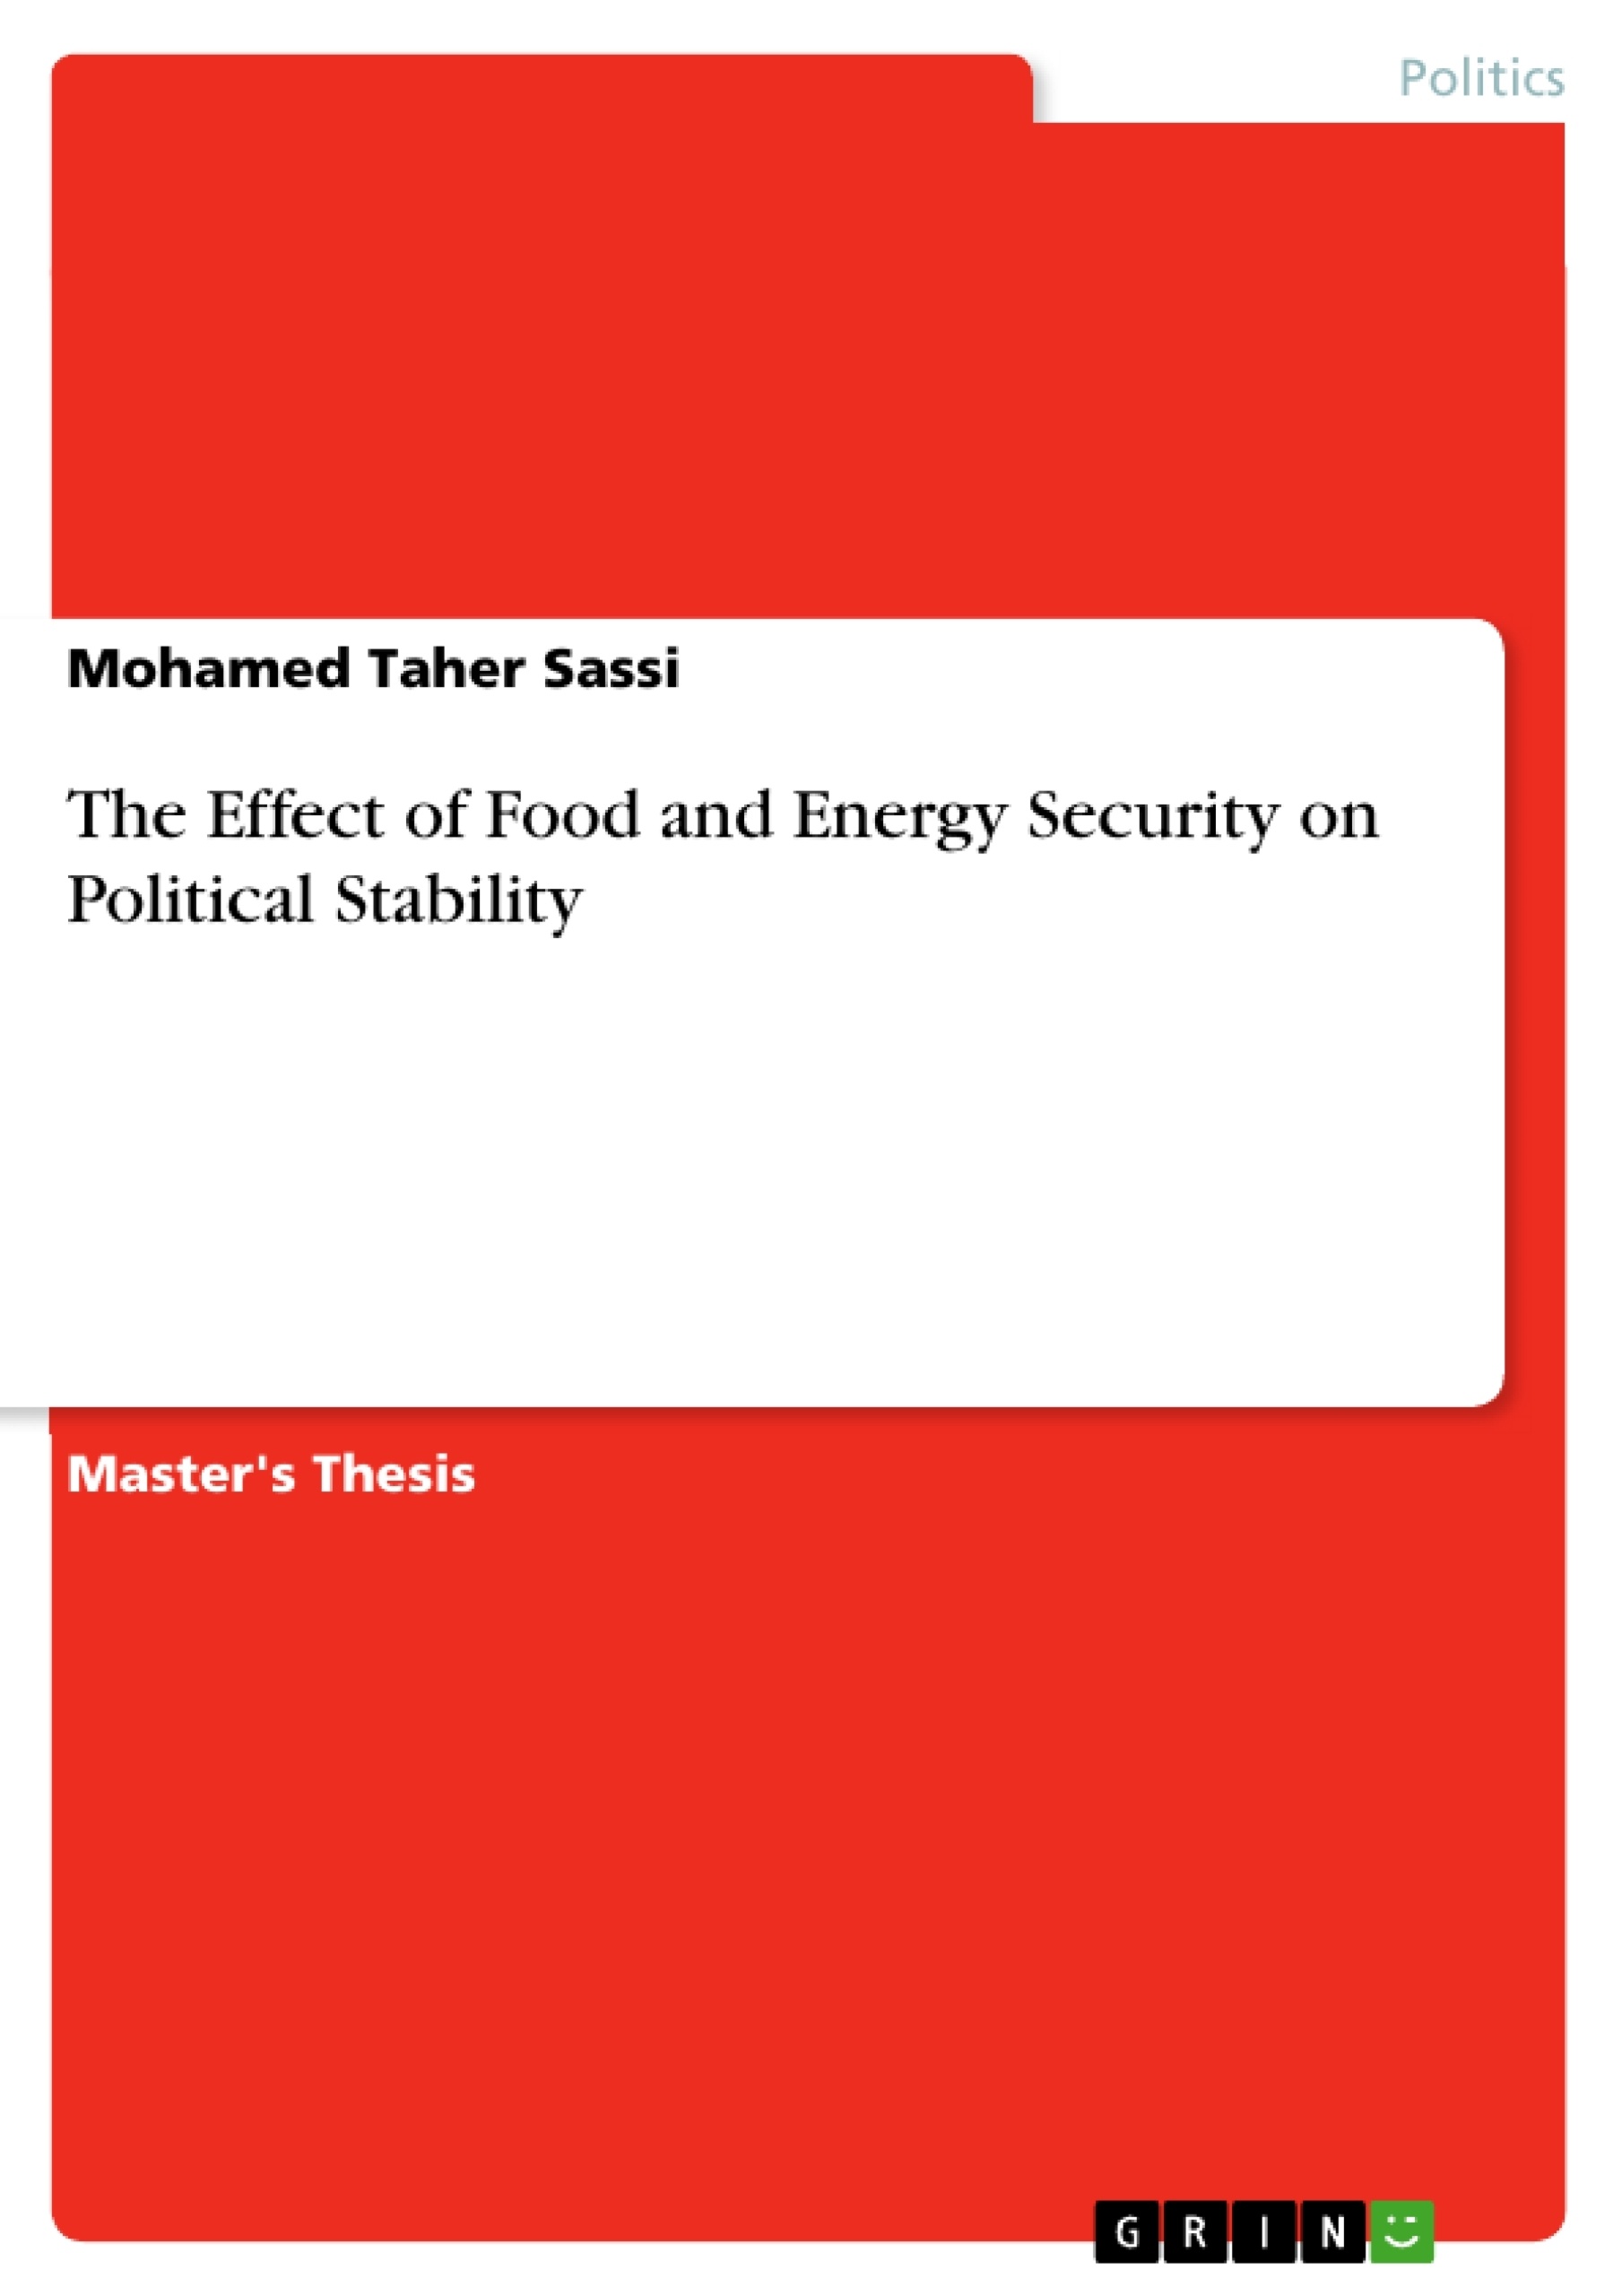 Title: The Effect of Food and Energy Security on Political Stability